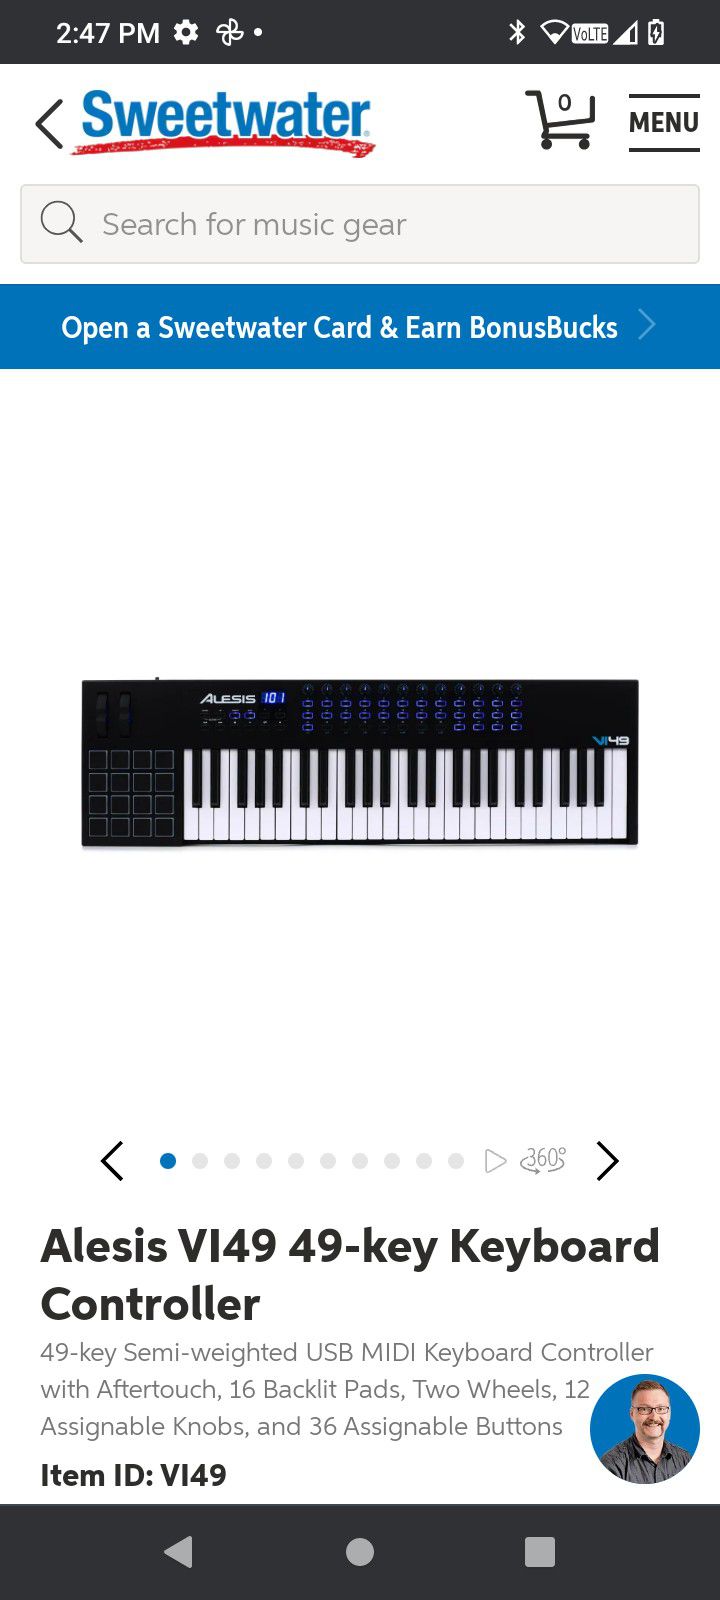  the Alesis Store
4.6 4.6 out of 5 stars 6,252
Alesis V49 - 49 Key USB MIDI Keyboard Controller with 8 Backlit Pads, 4 Assignable Knobs and Buttons, P